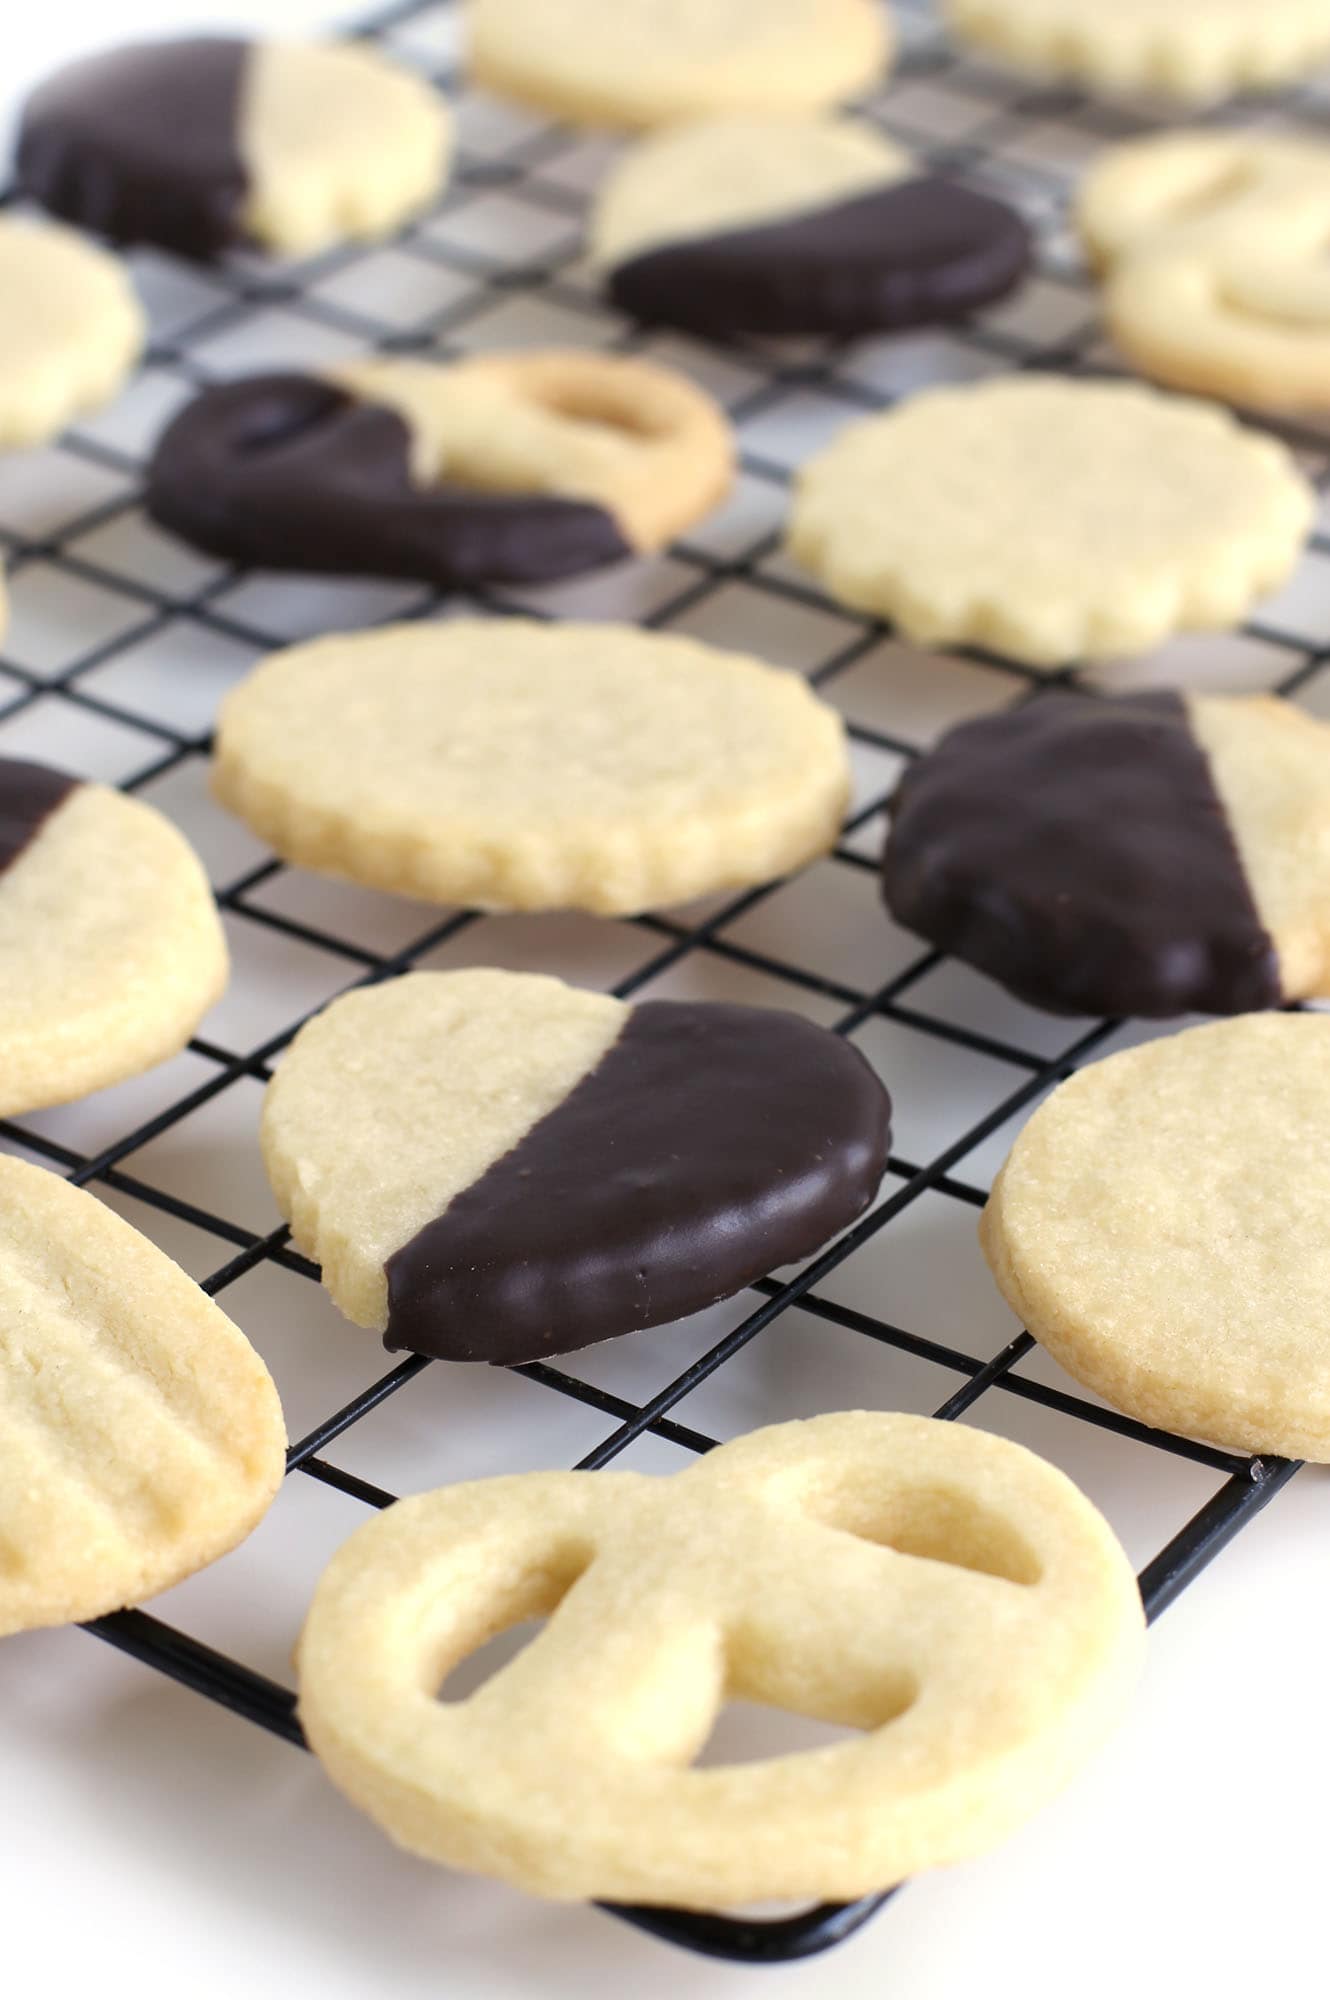 Pretzel, oval, round, heart-shaped sable cookies.